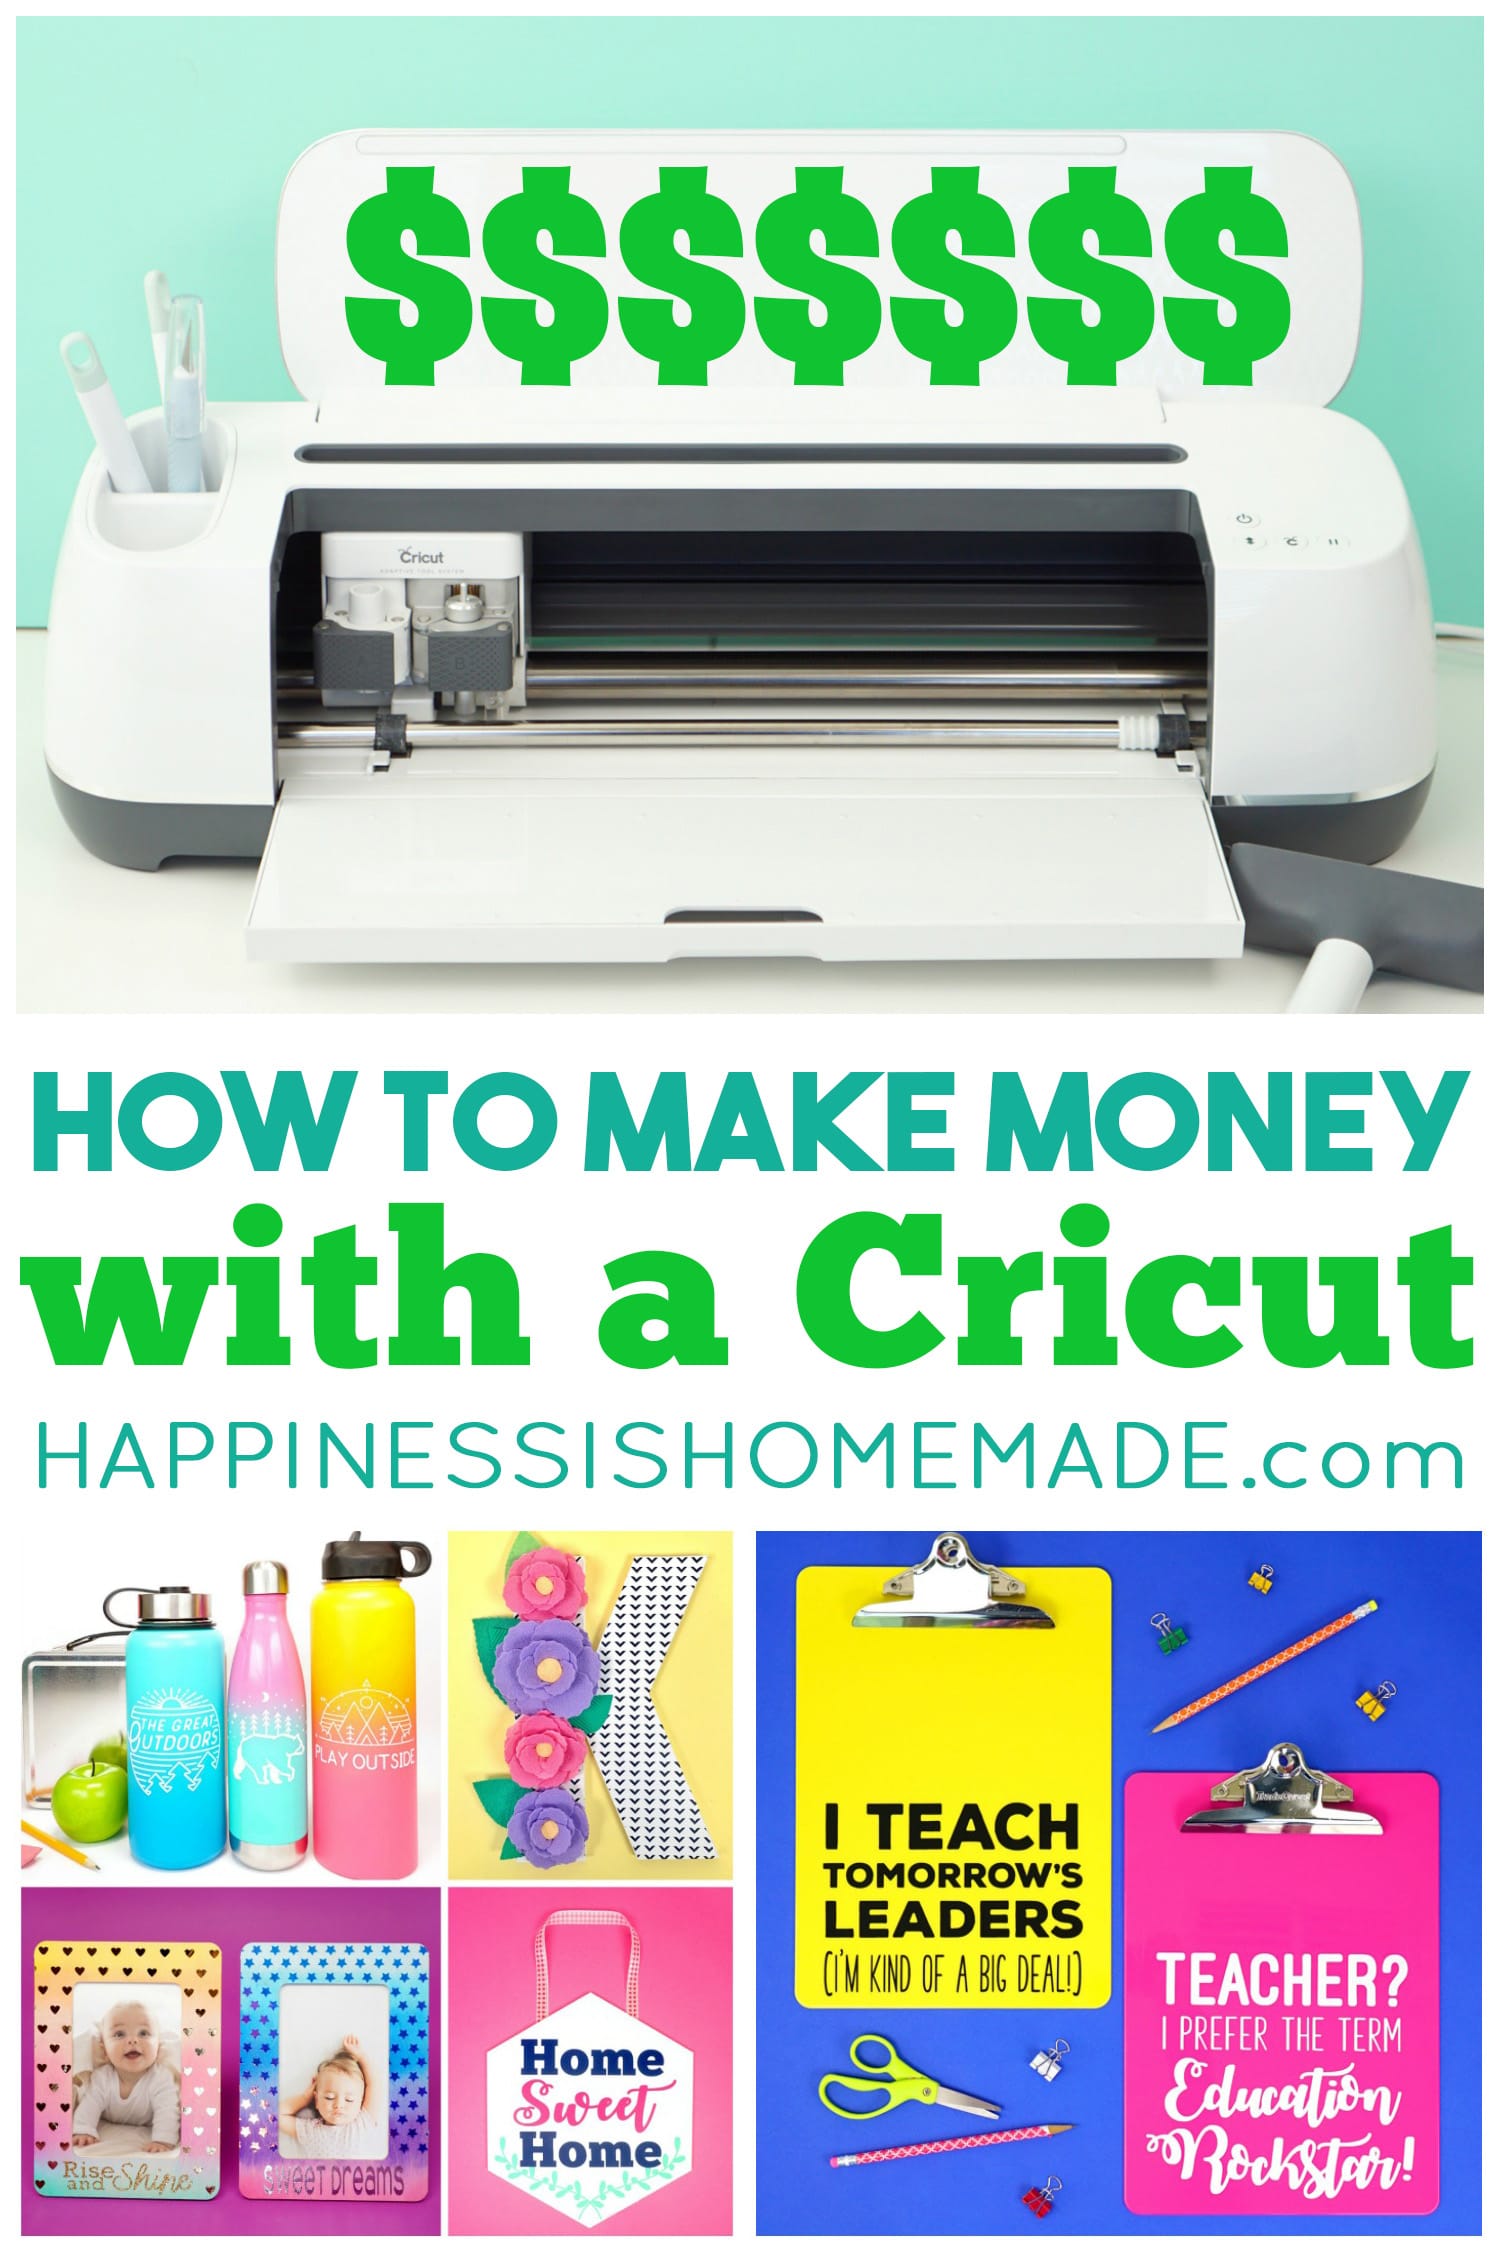 How to Make Money with a Cricut